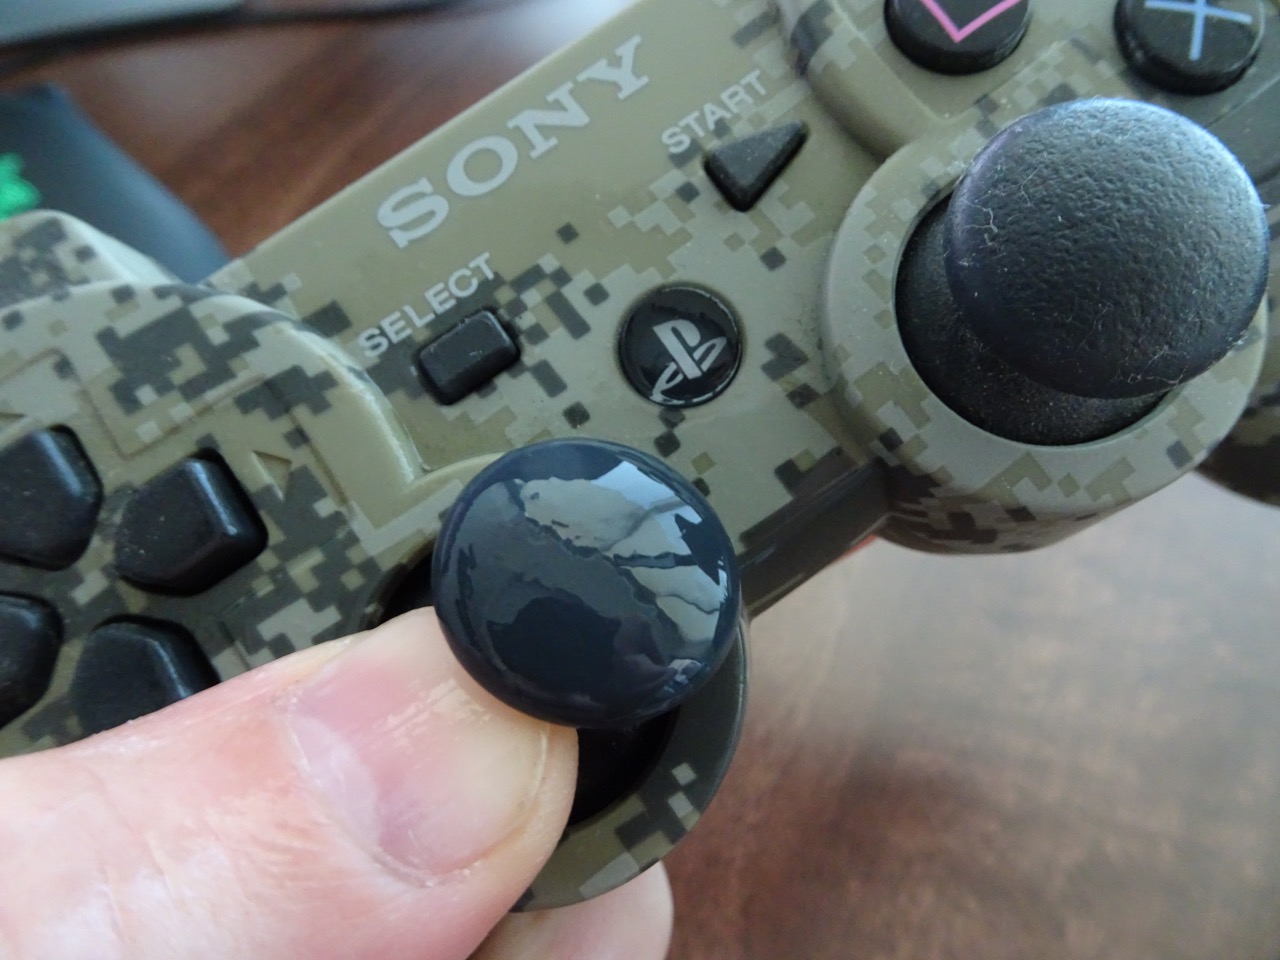 Cleaning the sticky PlayStation controller analogue thumb | Igor Kromin